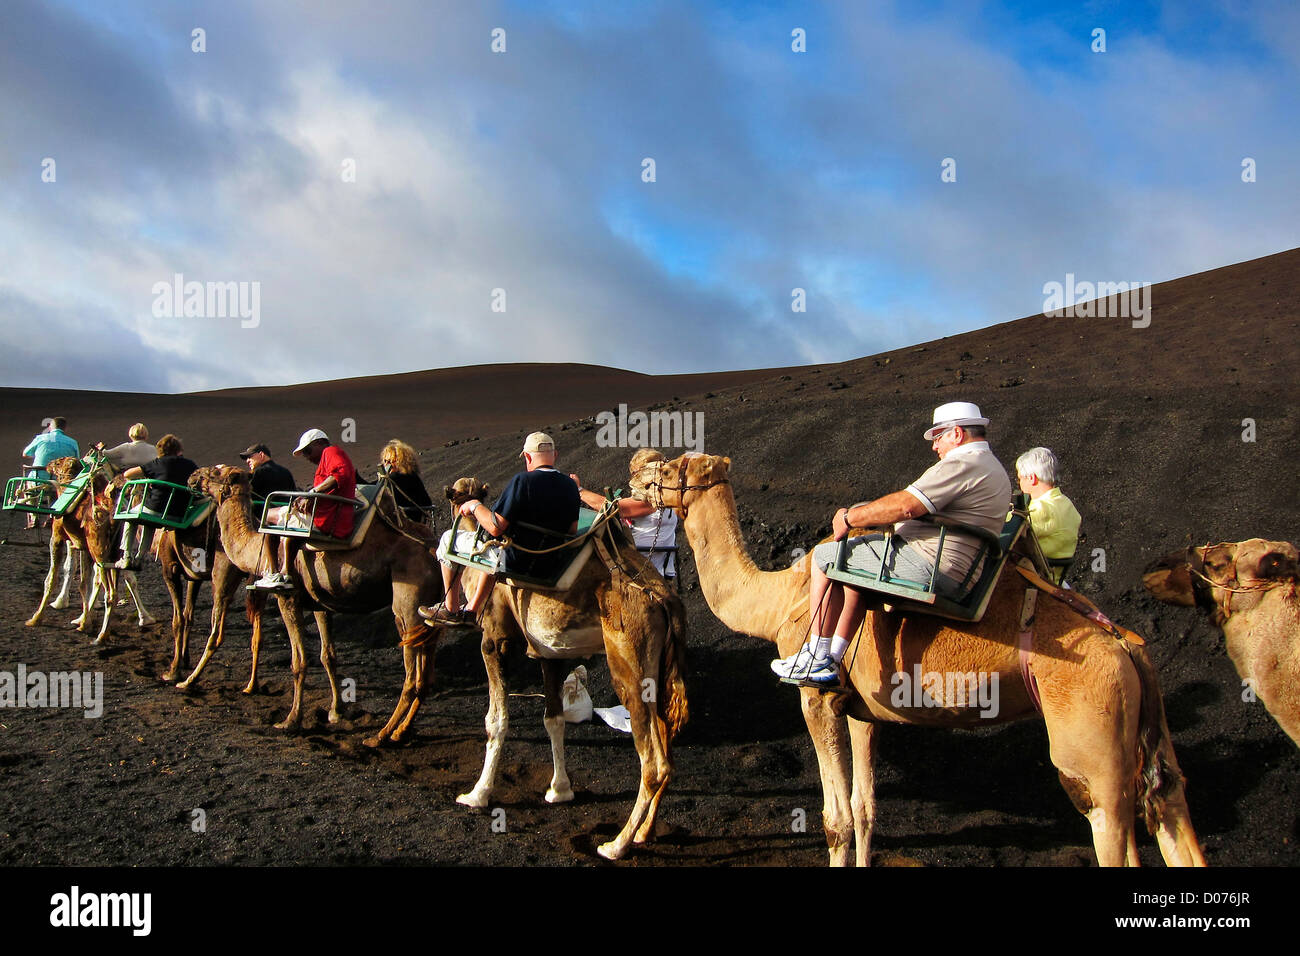 Camel safari of the volcanic landscape of Lanzarote, Canary Islands Stock Photo